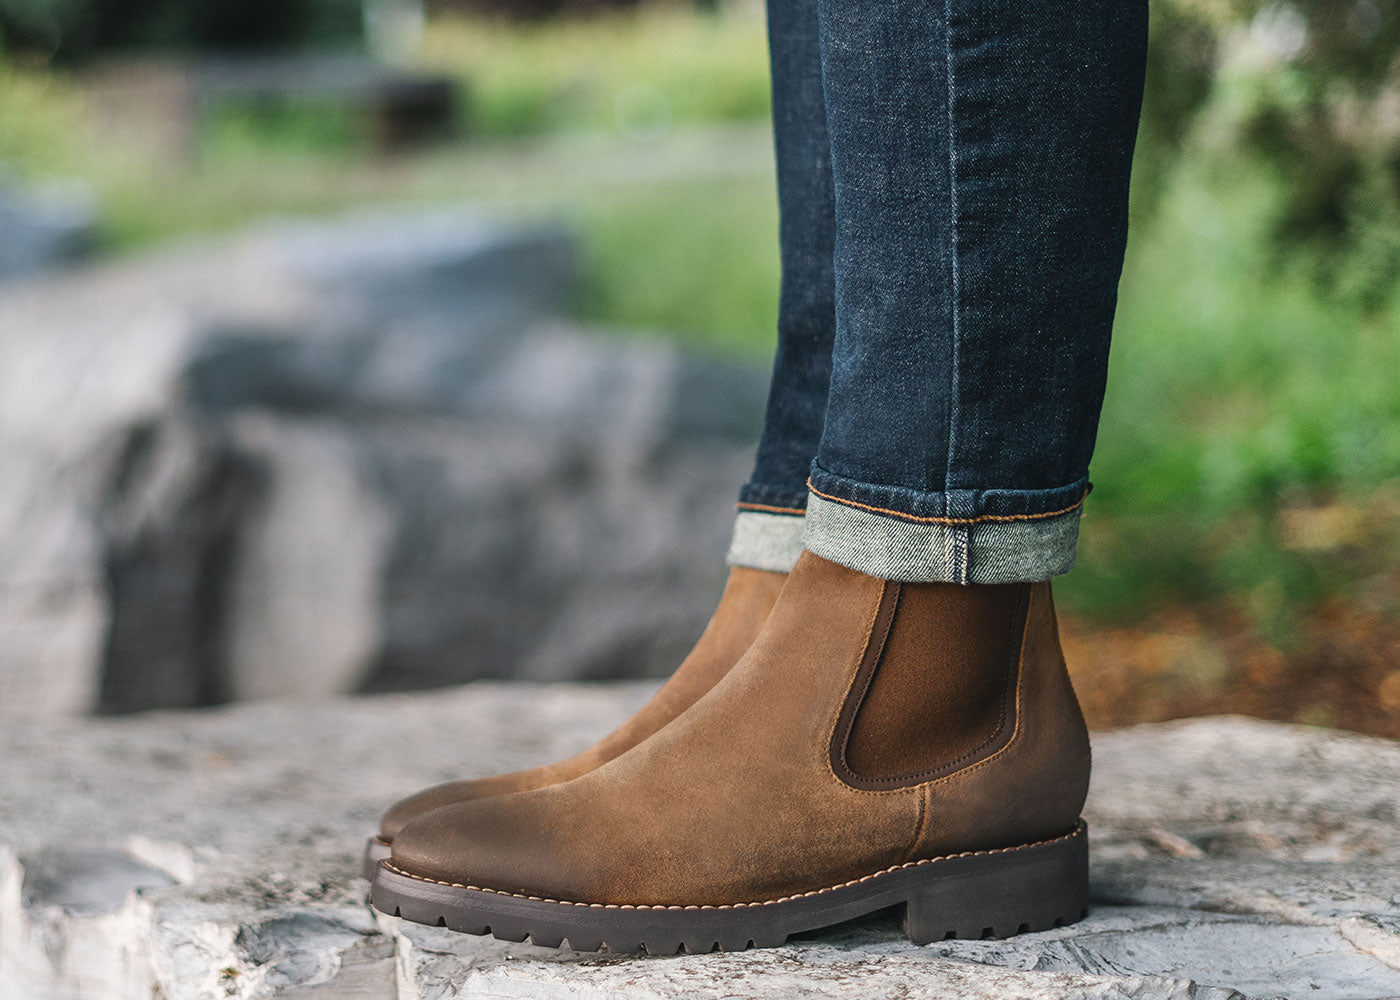 Men's Legend Chelsea Boot In Tobacco Leather - Thursday Boot Company